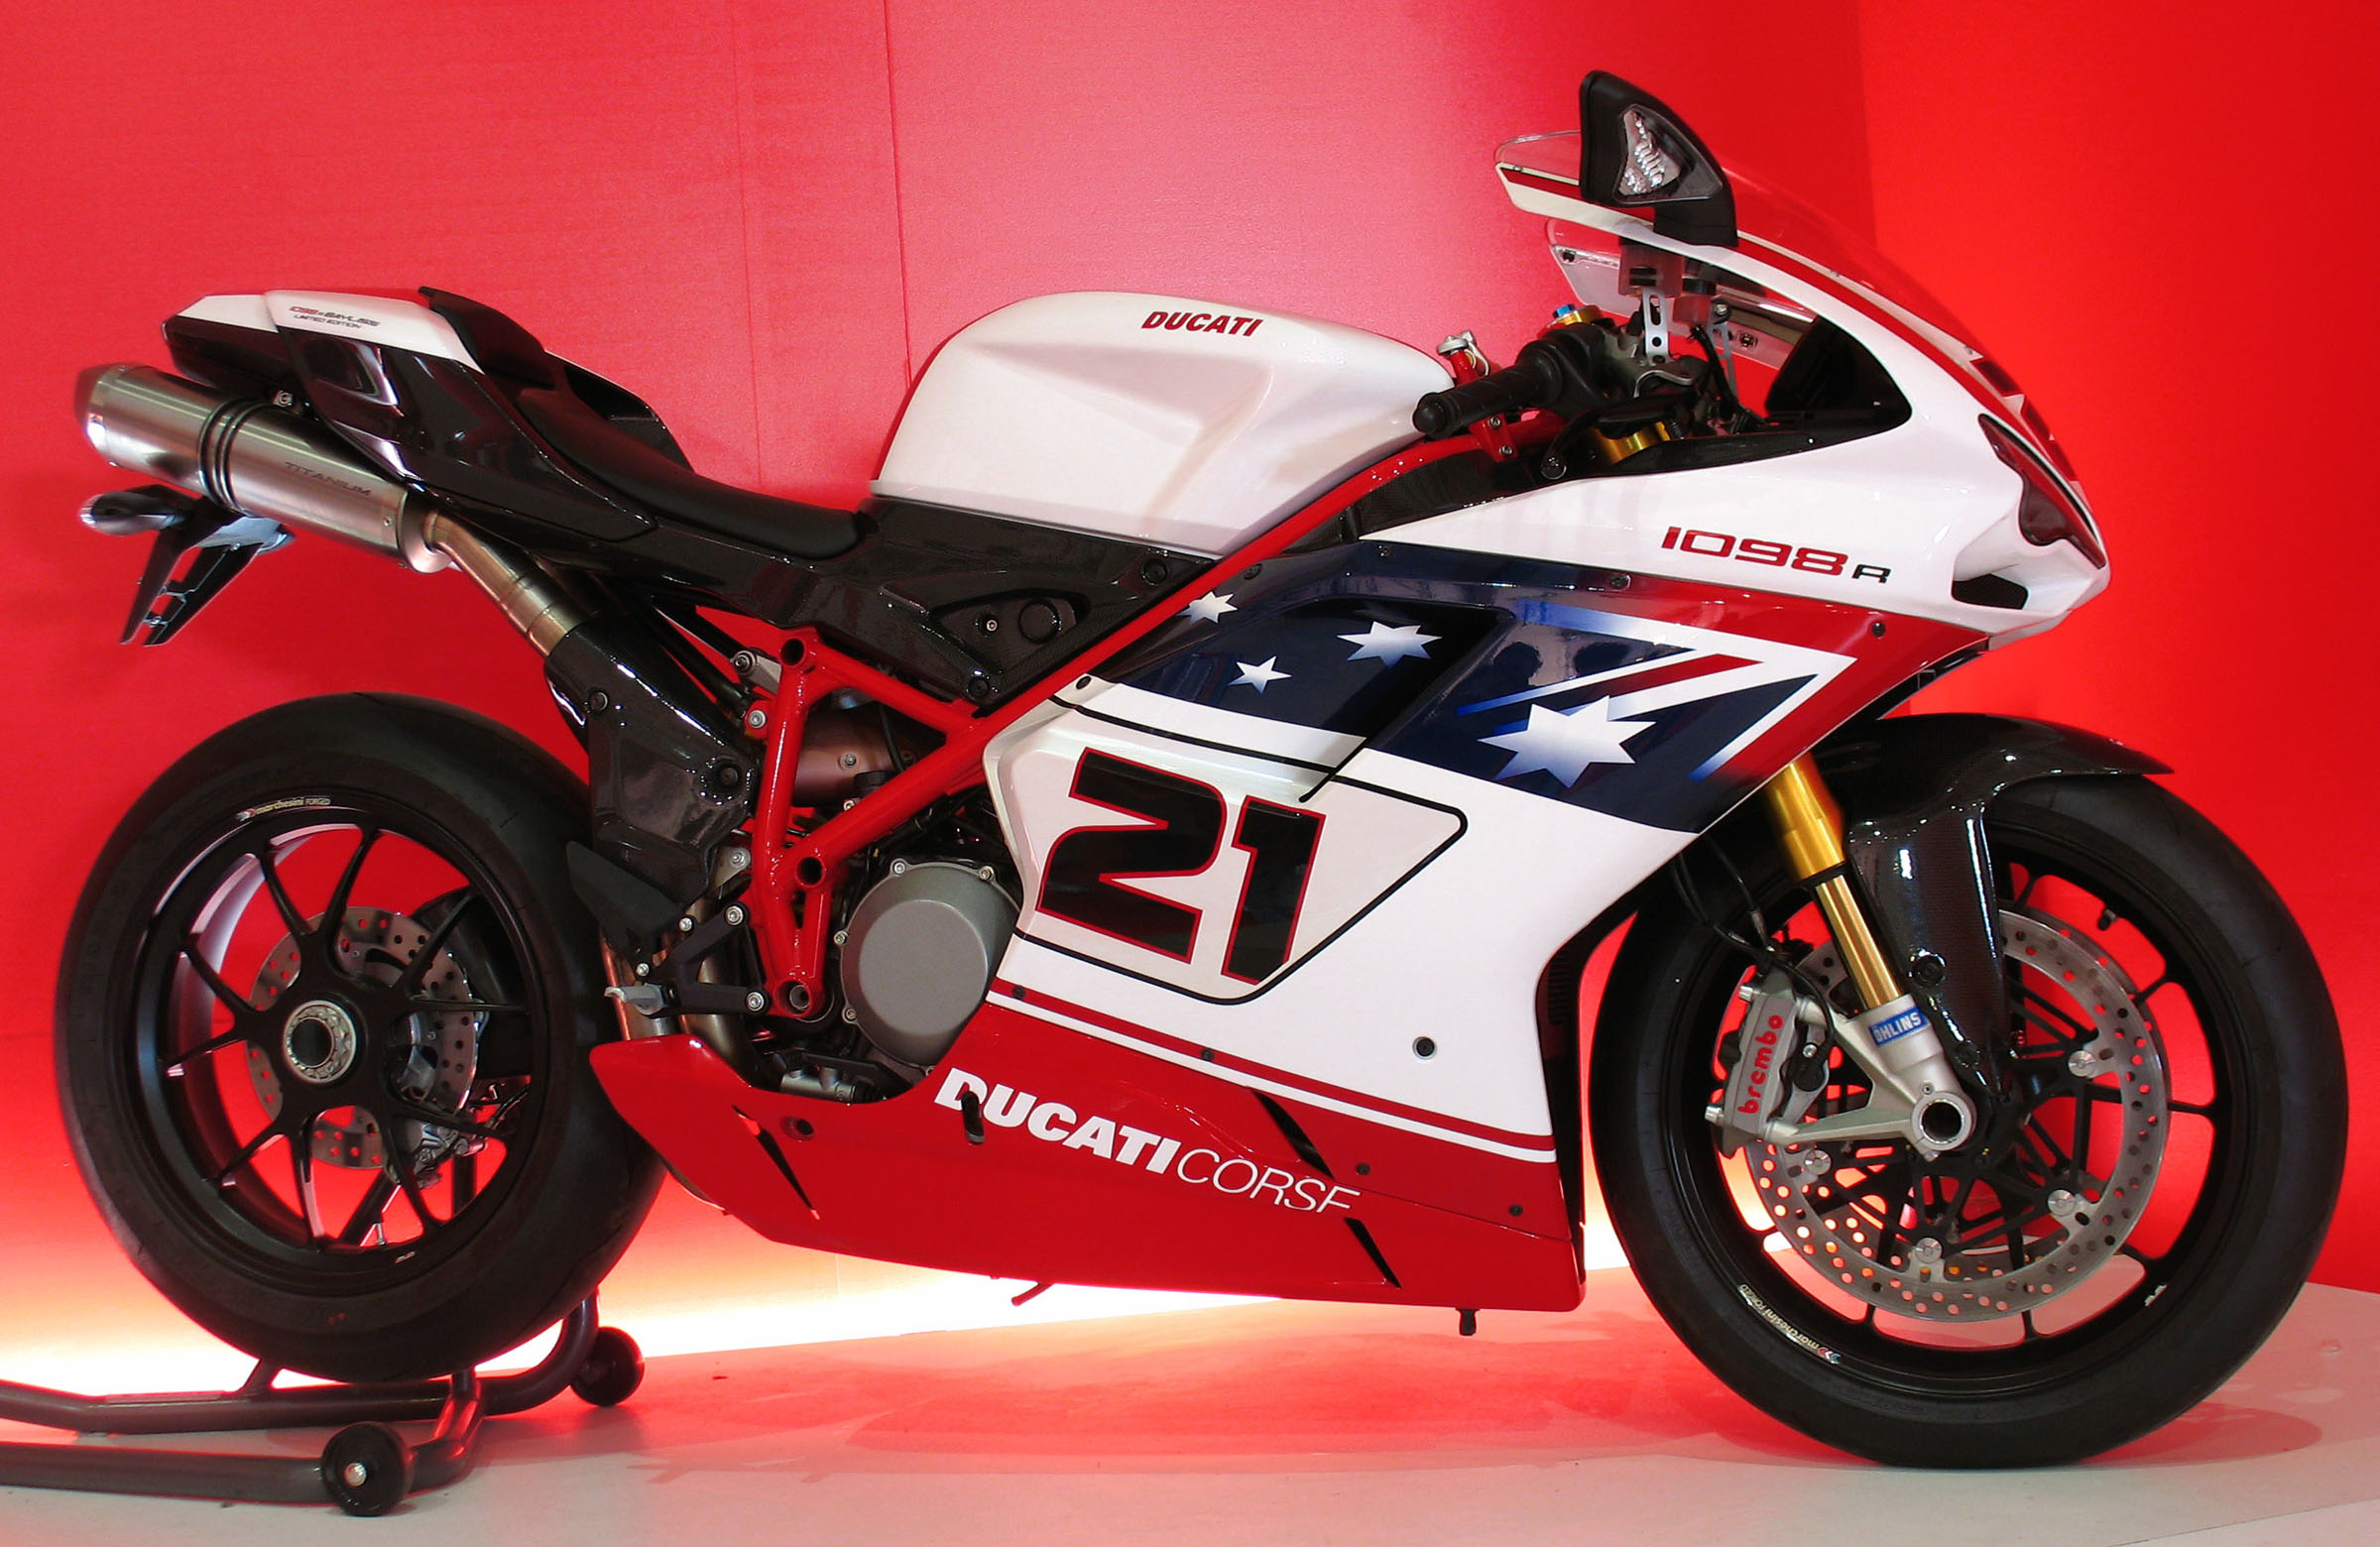 High Quality Tuning Files Ducati Superbike 1098 R  180hp